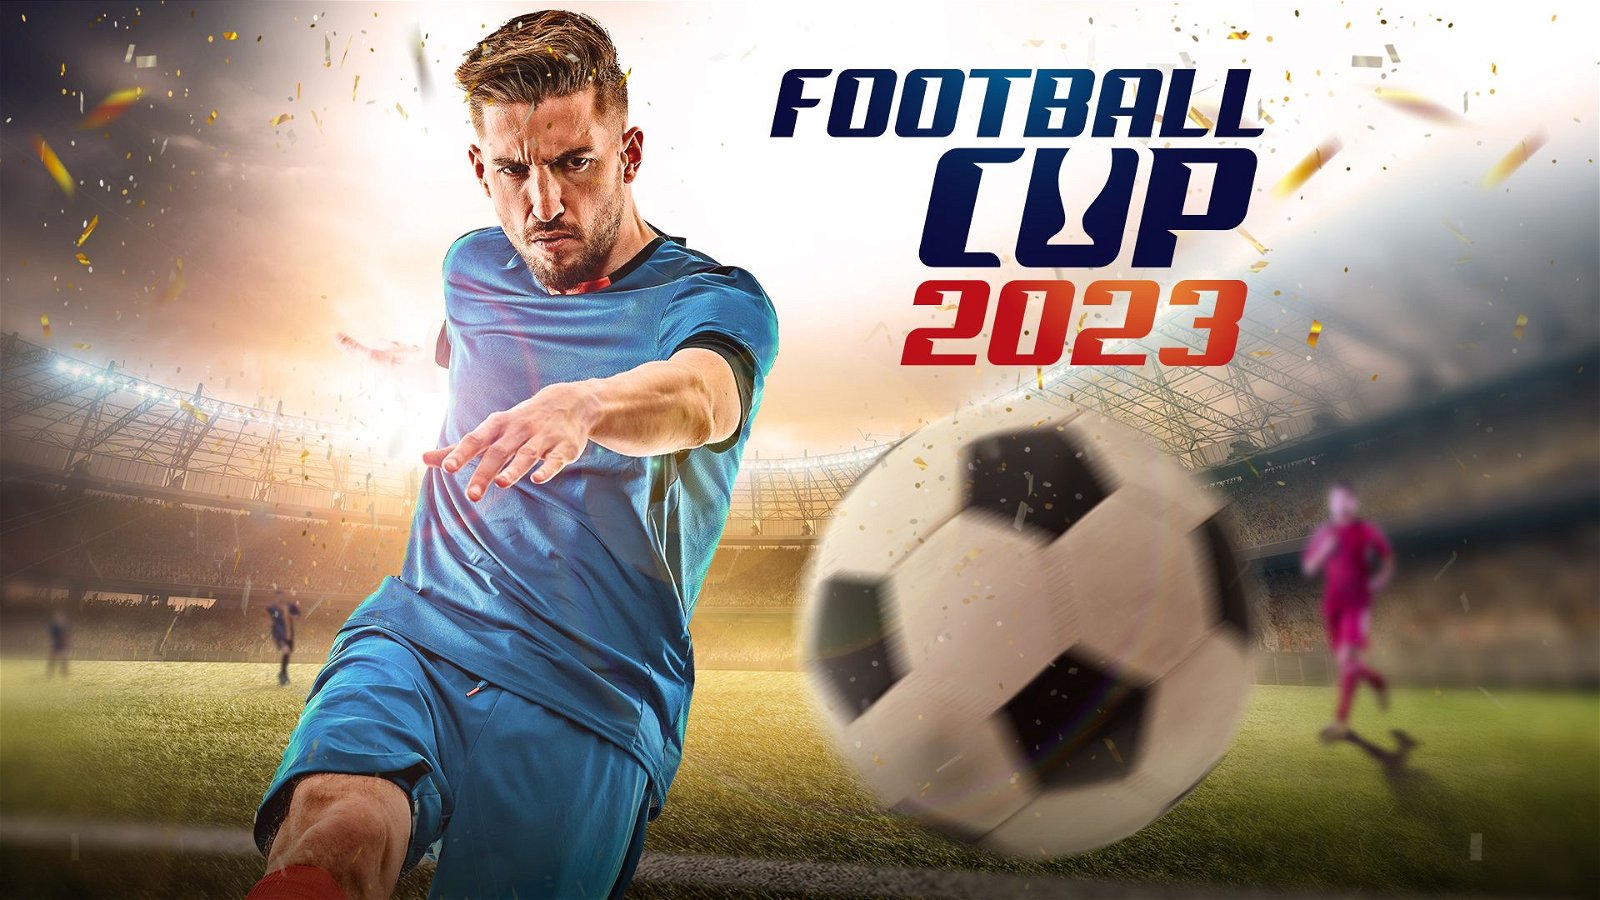 Image of Football Cup 2023